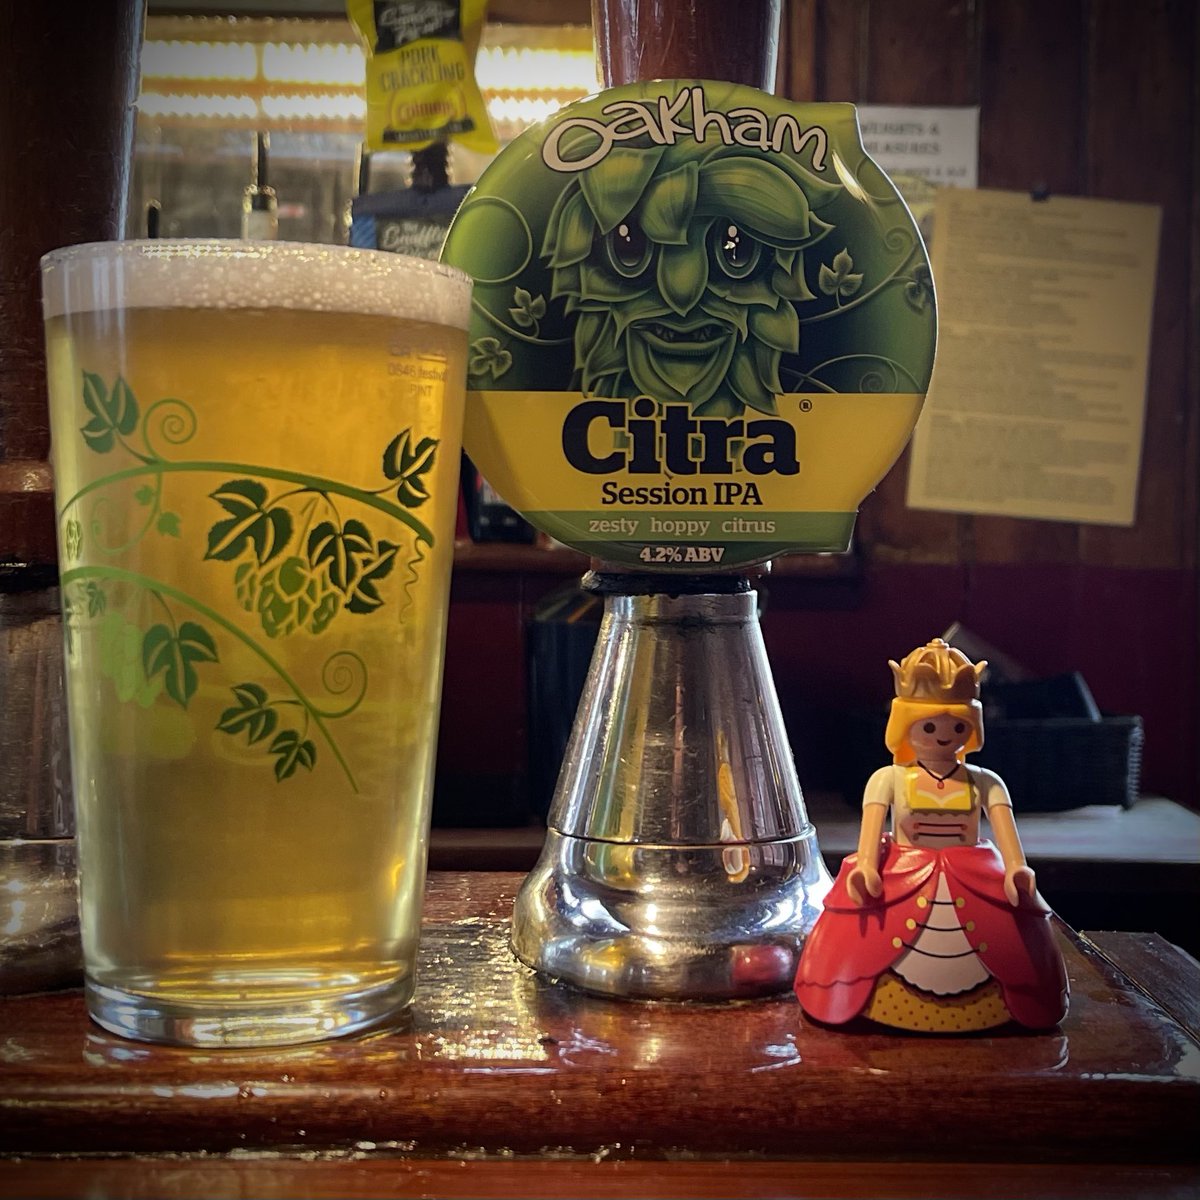 By popular demand, a new resident on the bar, @OakhamAles Citra is a permanent cask ale on the bar

#Teamfourale #beer #craftkeg #craftbeer #fourale #craftbeerbar #gosport #stokeroadgosport